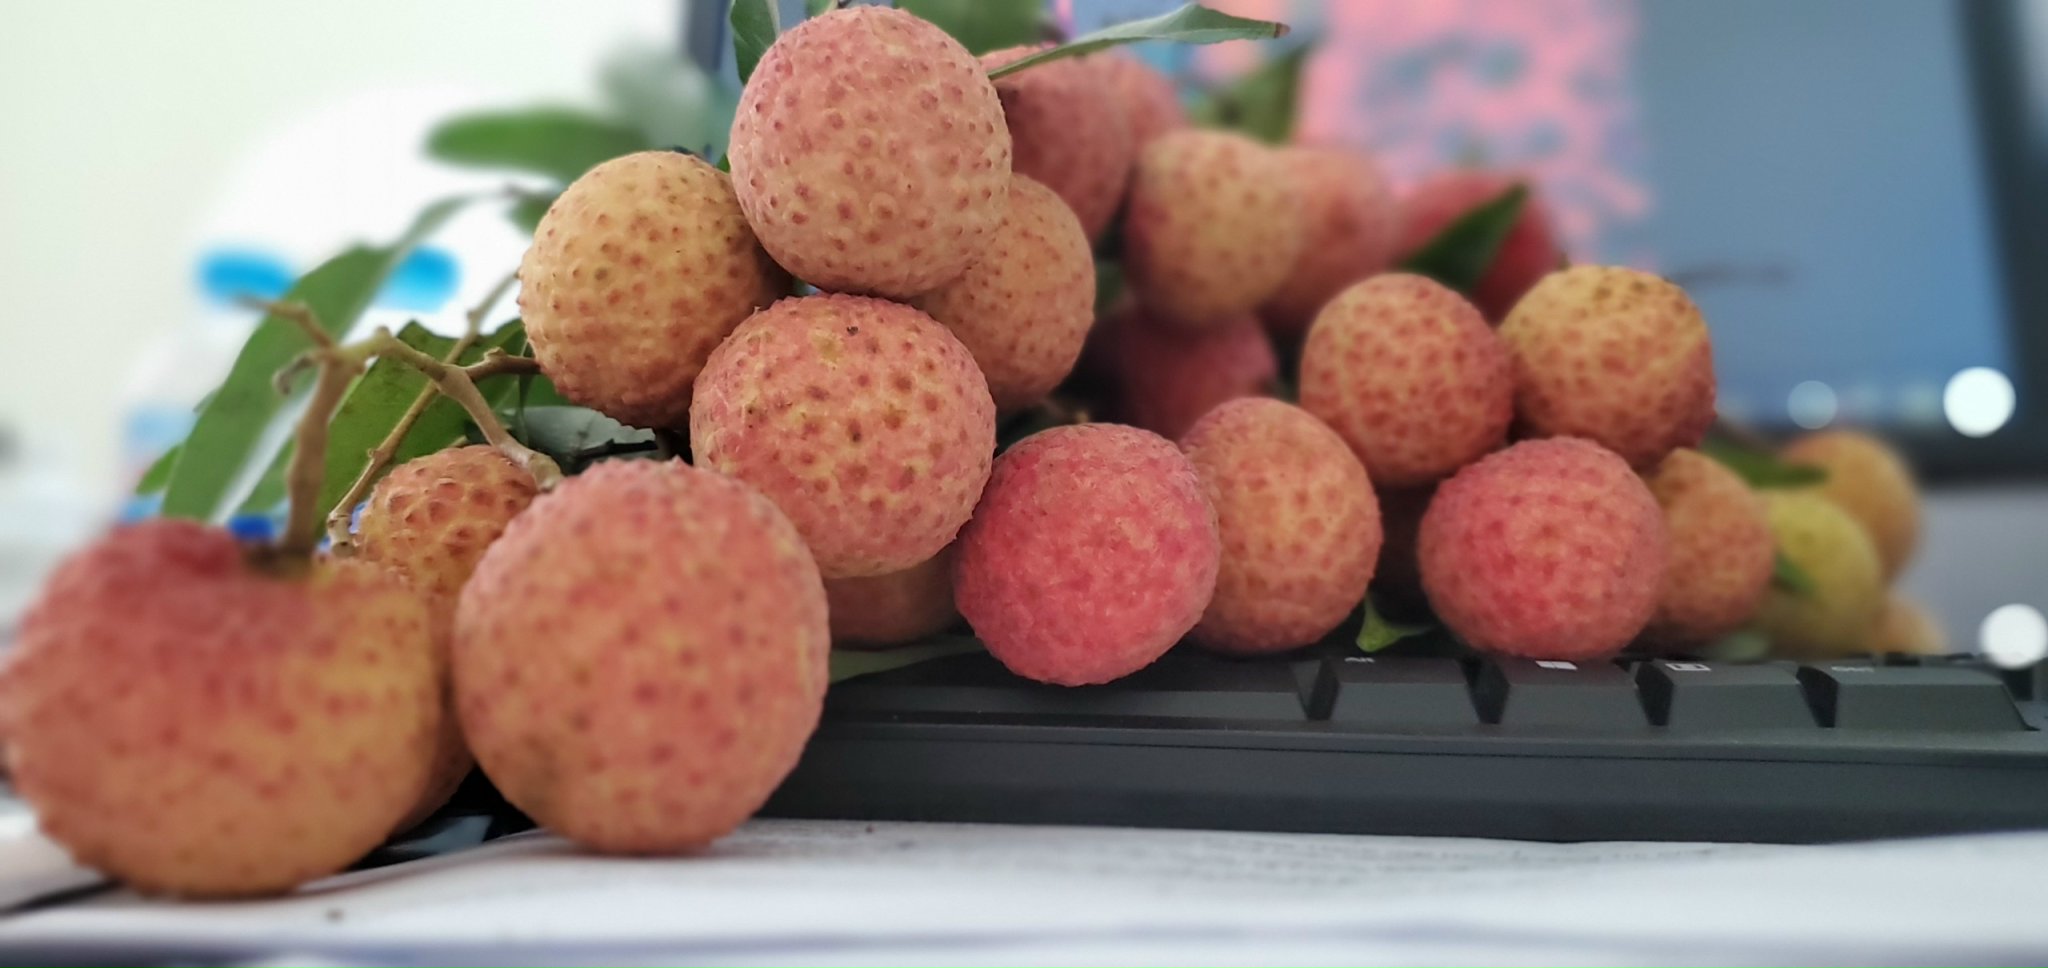 Nutritional Benefits of Lychee